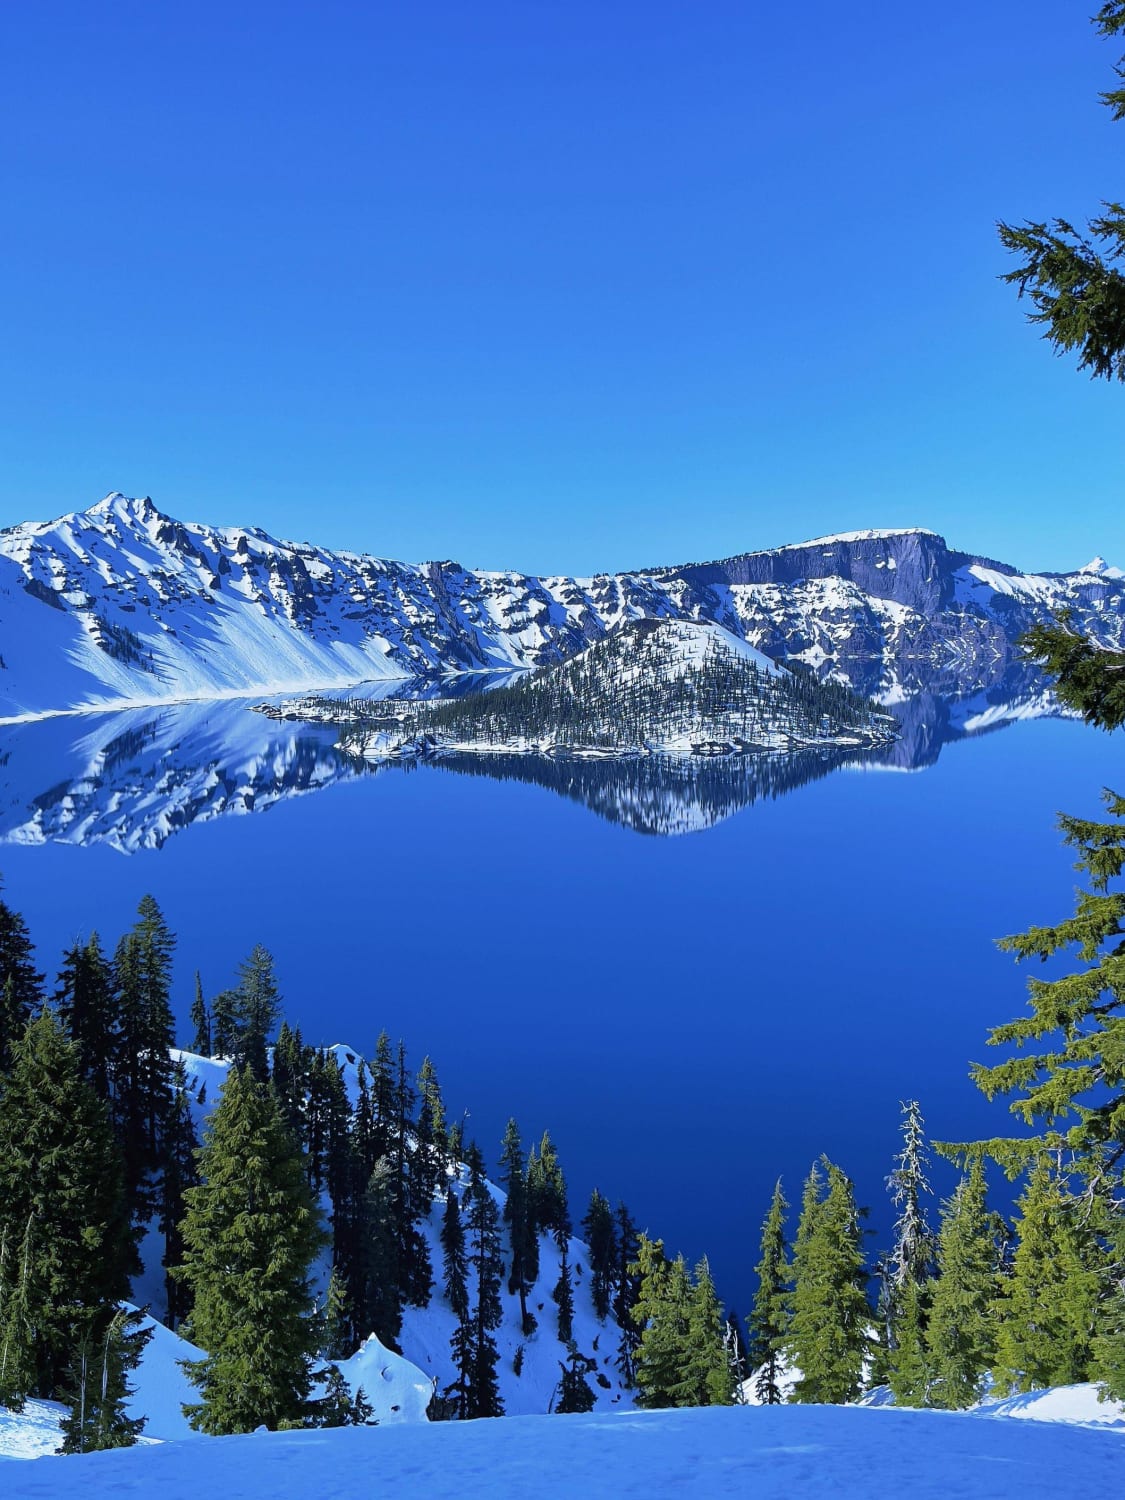 Crater lake in Oregon (Photo credit to u/The_30_kid)